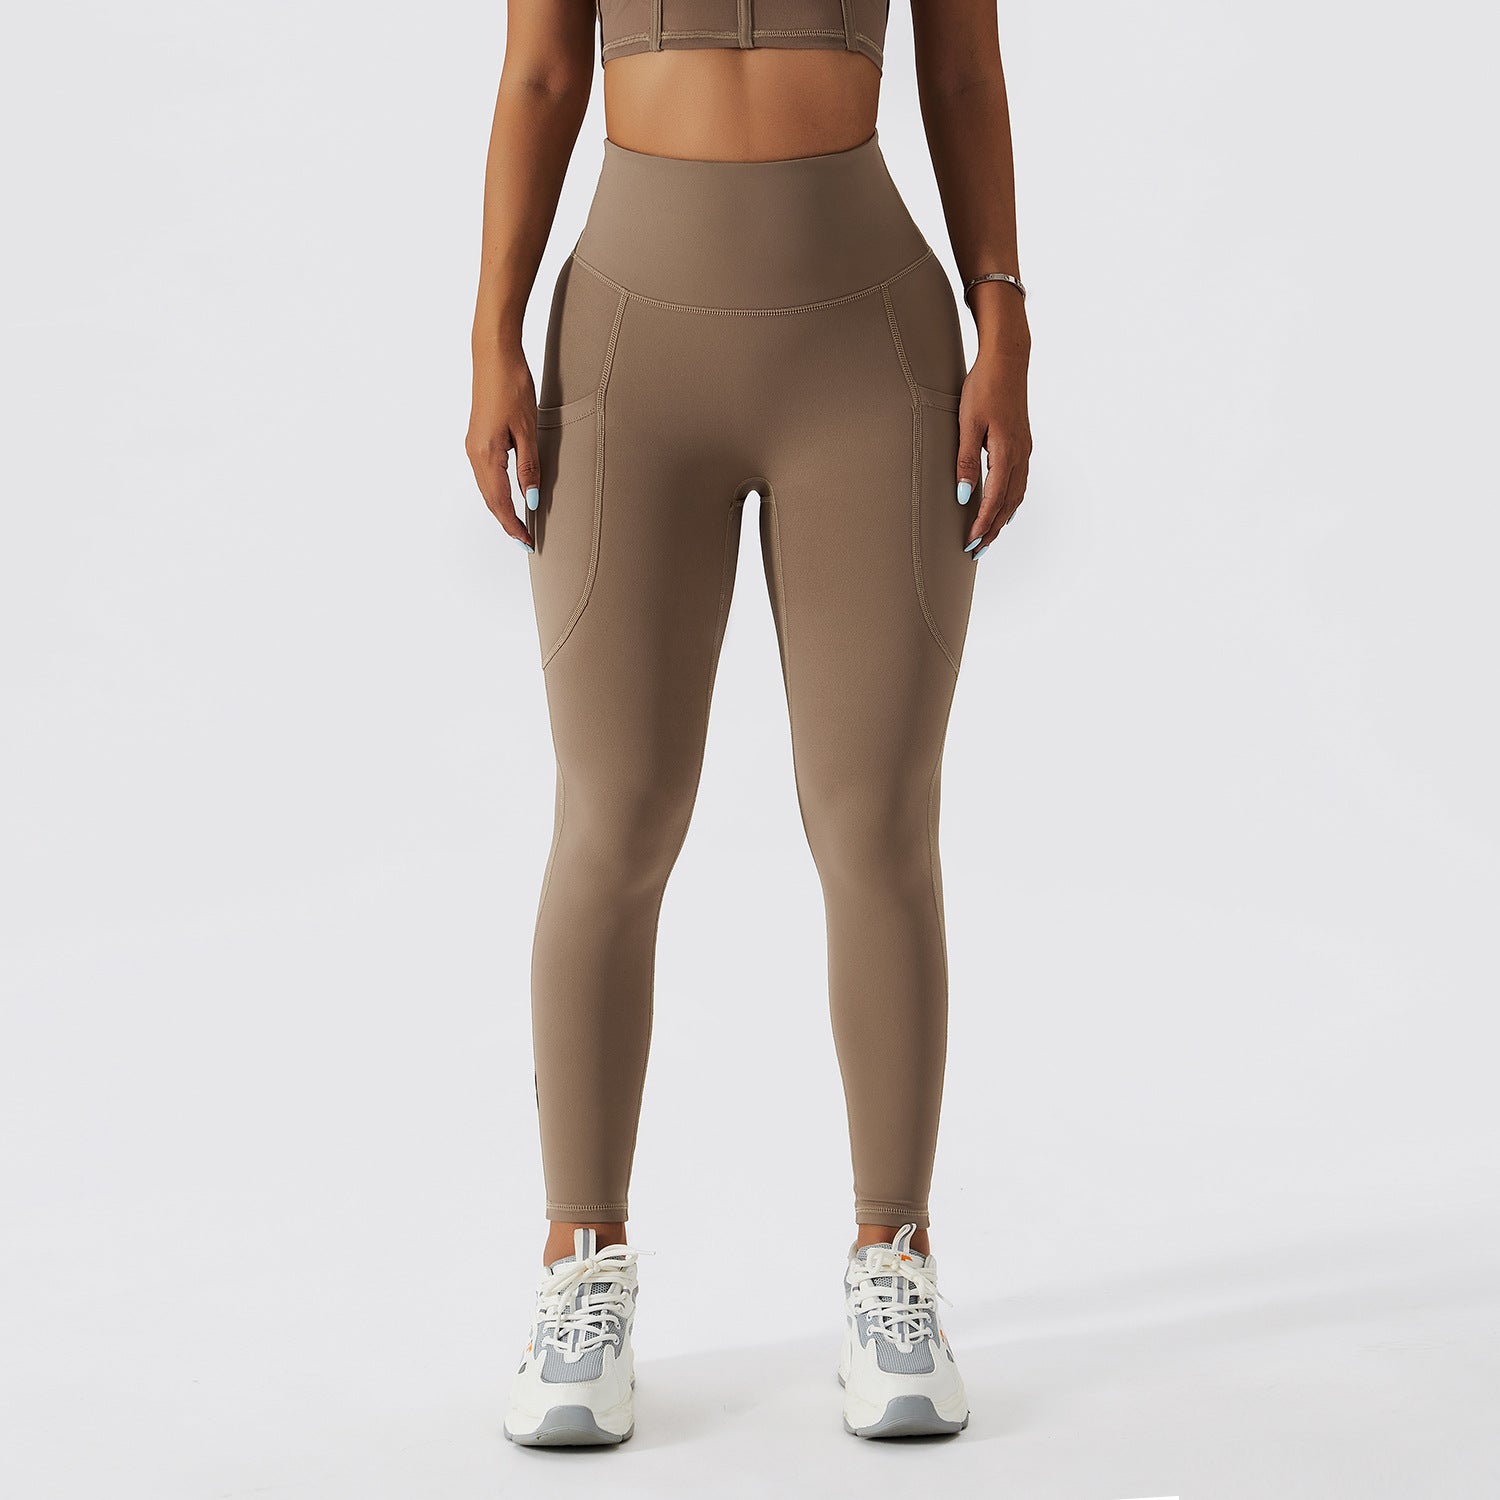 Breathable and quick-drying nude legging